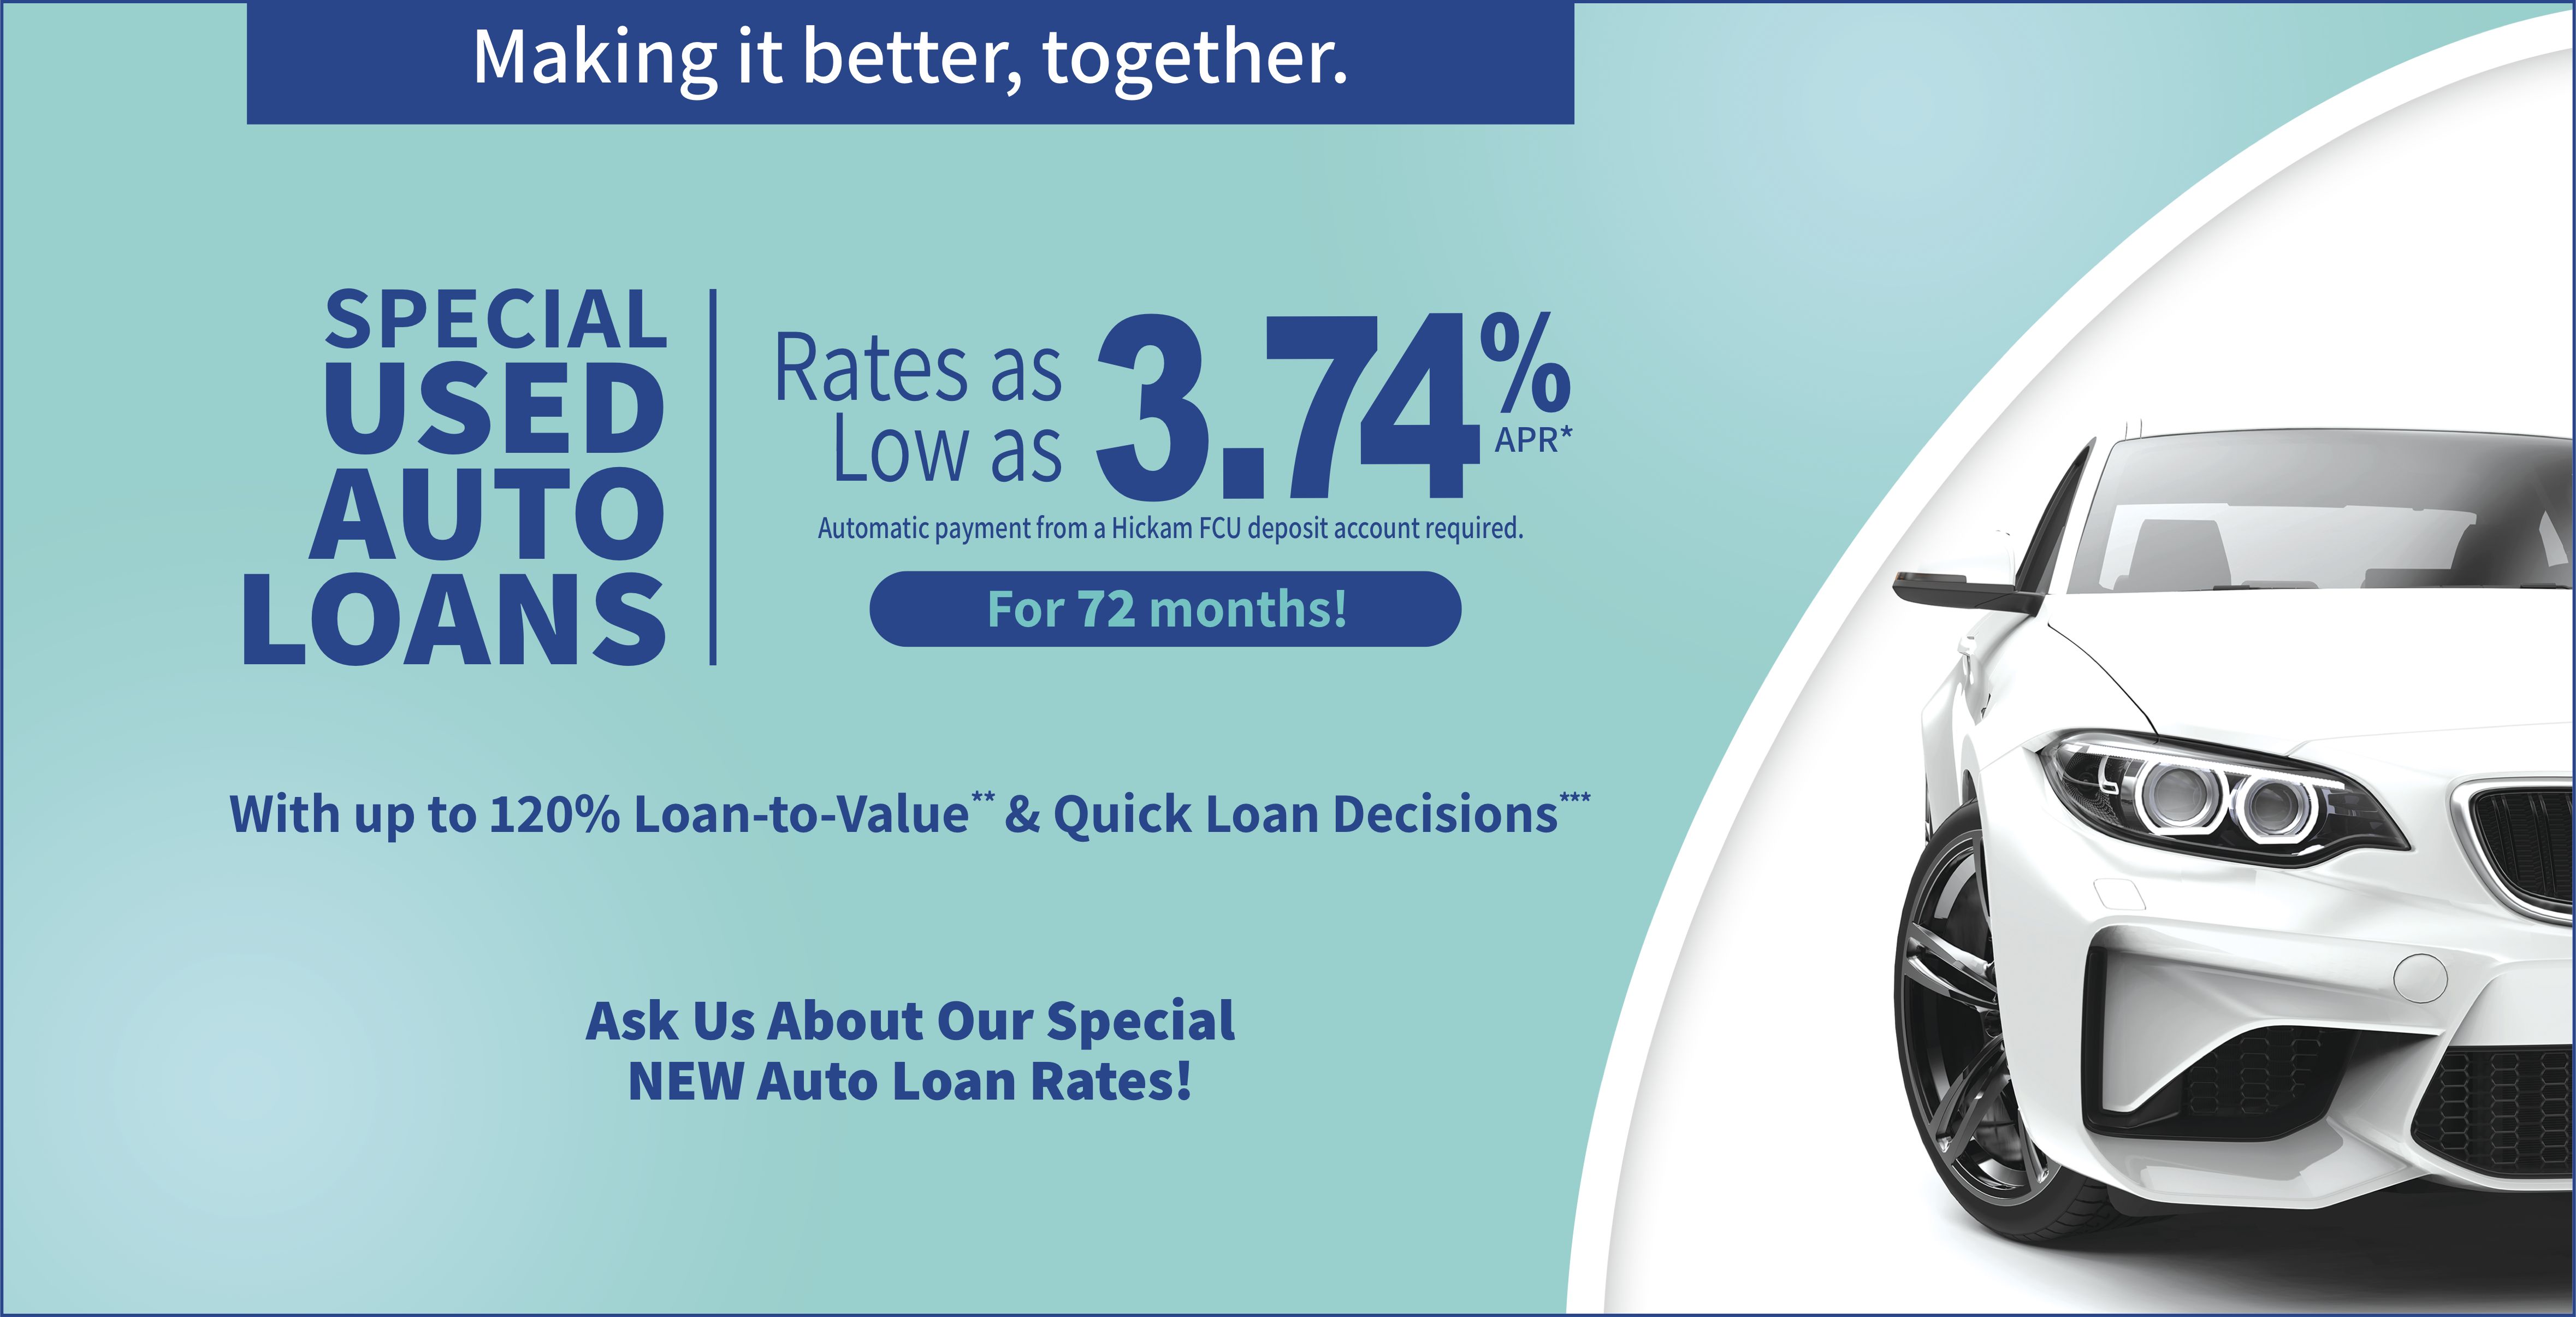 Used Auto Loan Special for 72 months!. Rates as low as 3.74% with up to 120% loan-to-value** ask us about our special new auto loan rates! great low rates quick loan decisions*** Easy online applications